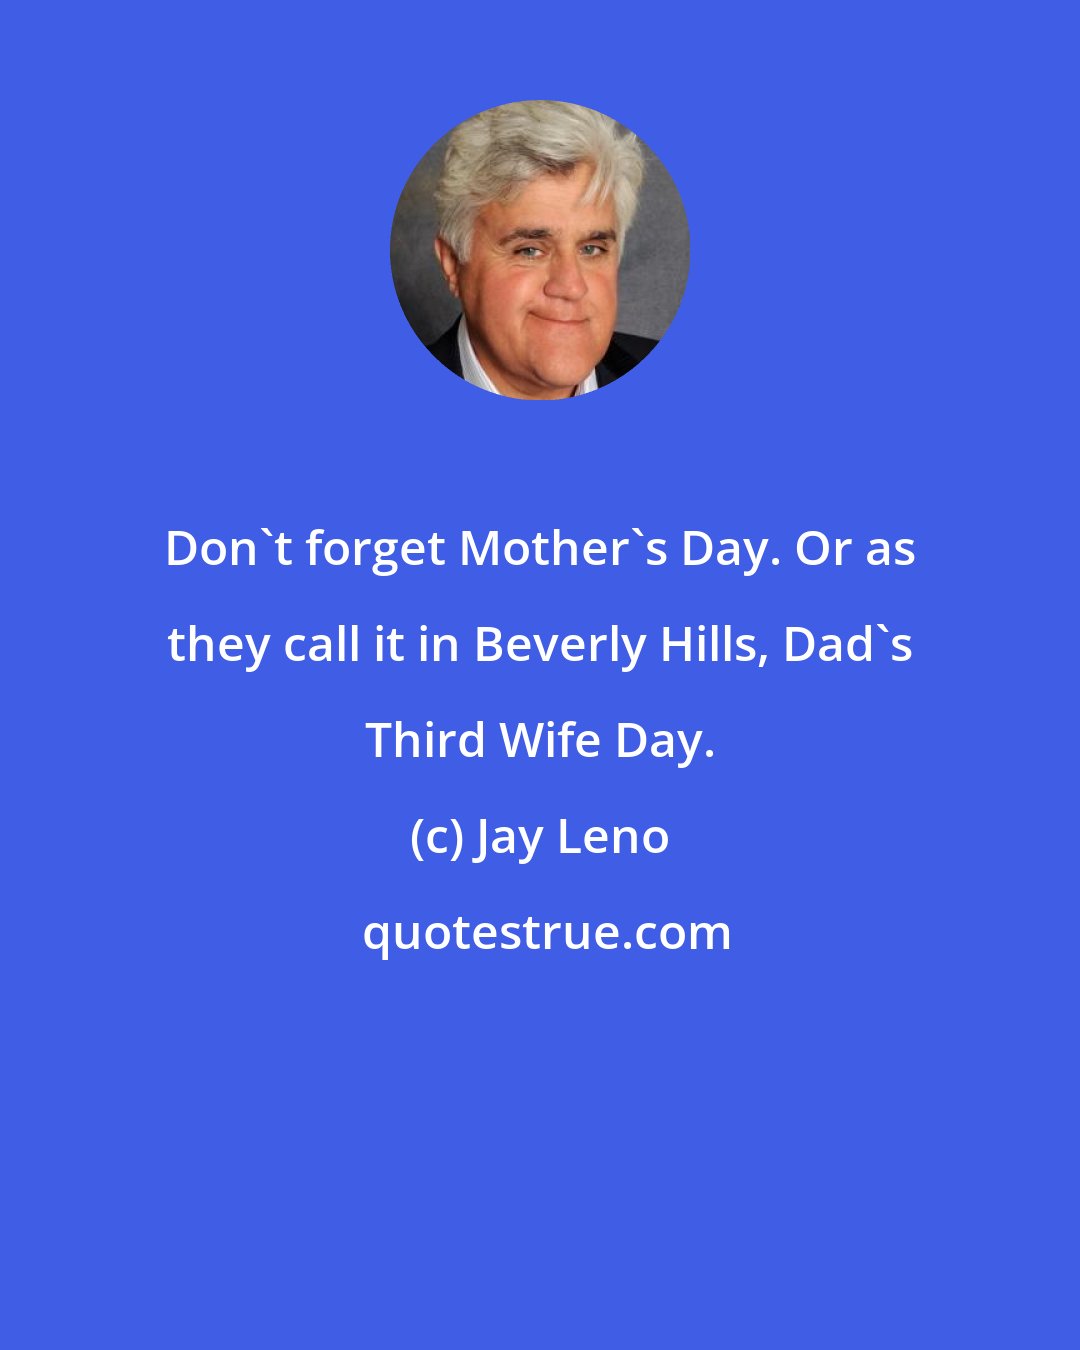 Jay Leno: Don't forget Mother's Day. Or as they call it in Beverly Hills, Dad's Third Wife Day.